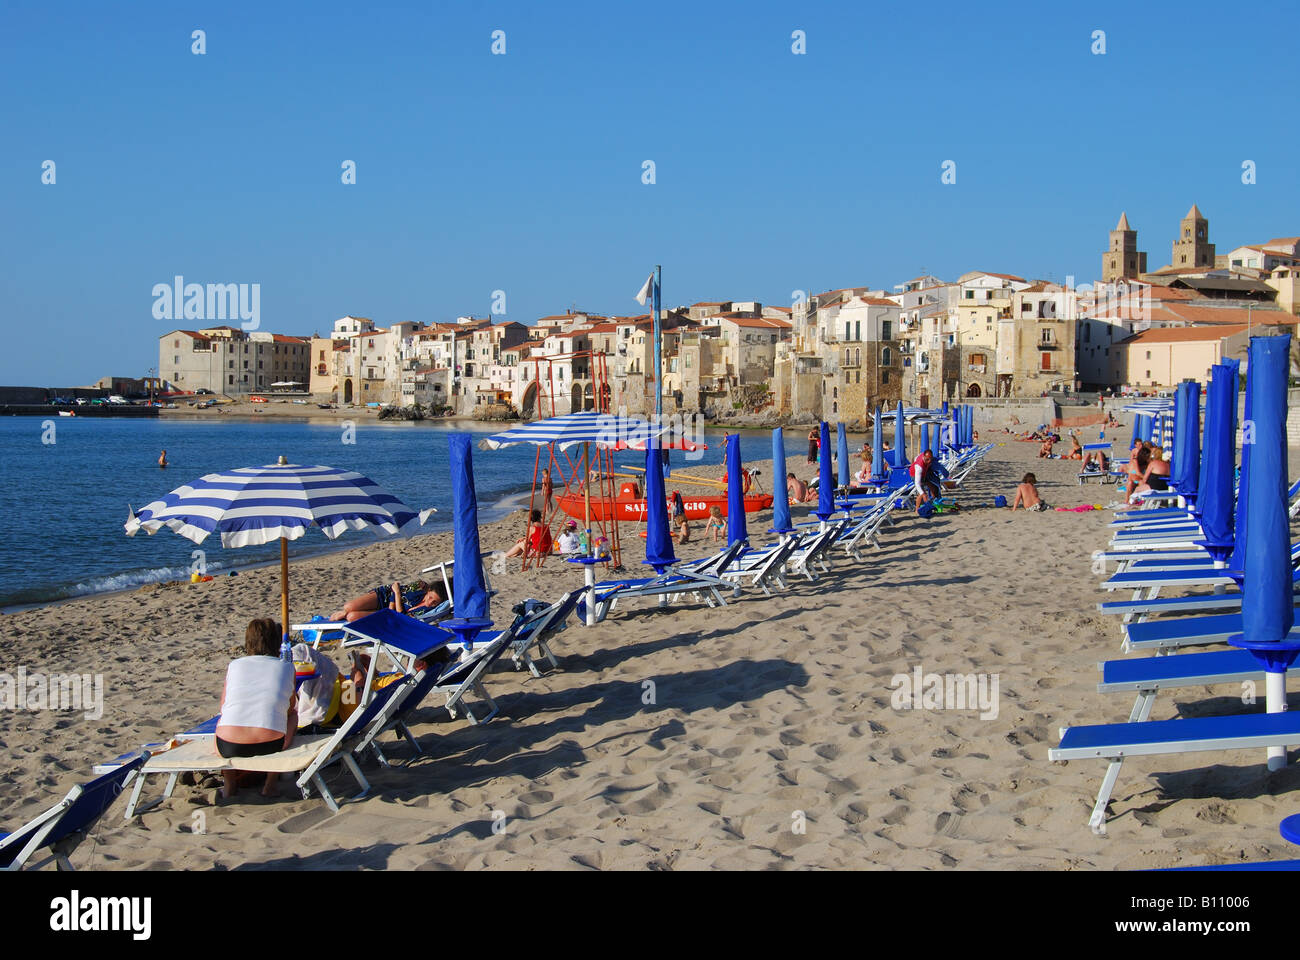 View of city and beach, Cefalu, Palermo Province, Sicily, Italy Stock Photo